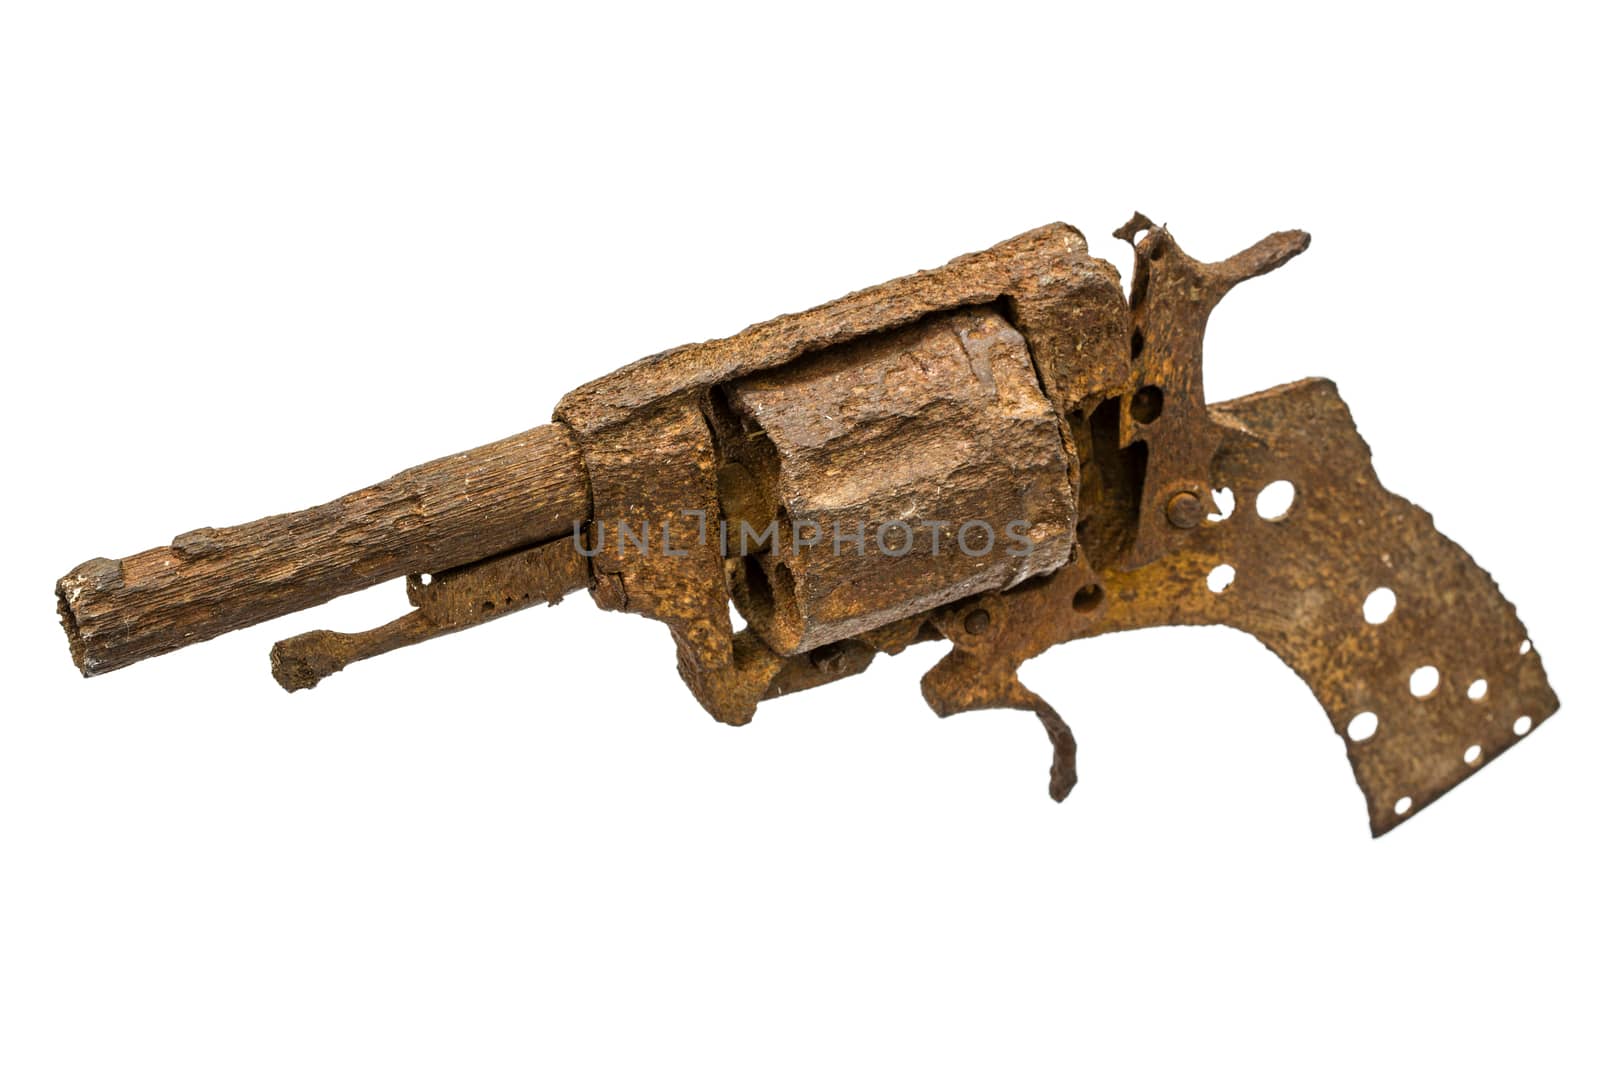 Old rusty pistol, Isolated on white background by kostiuchenko